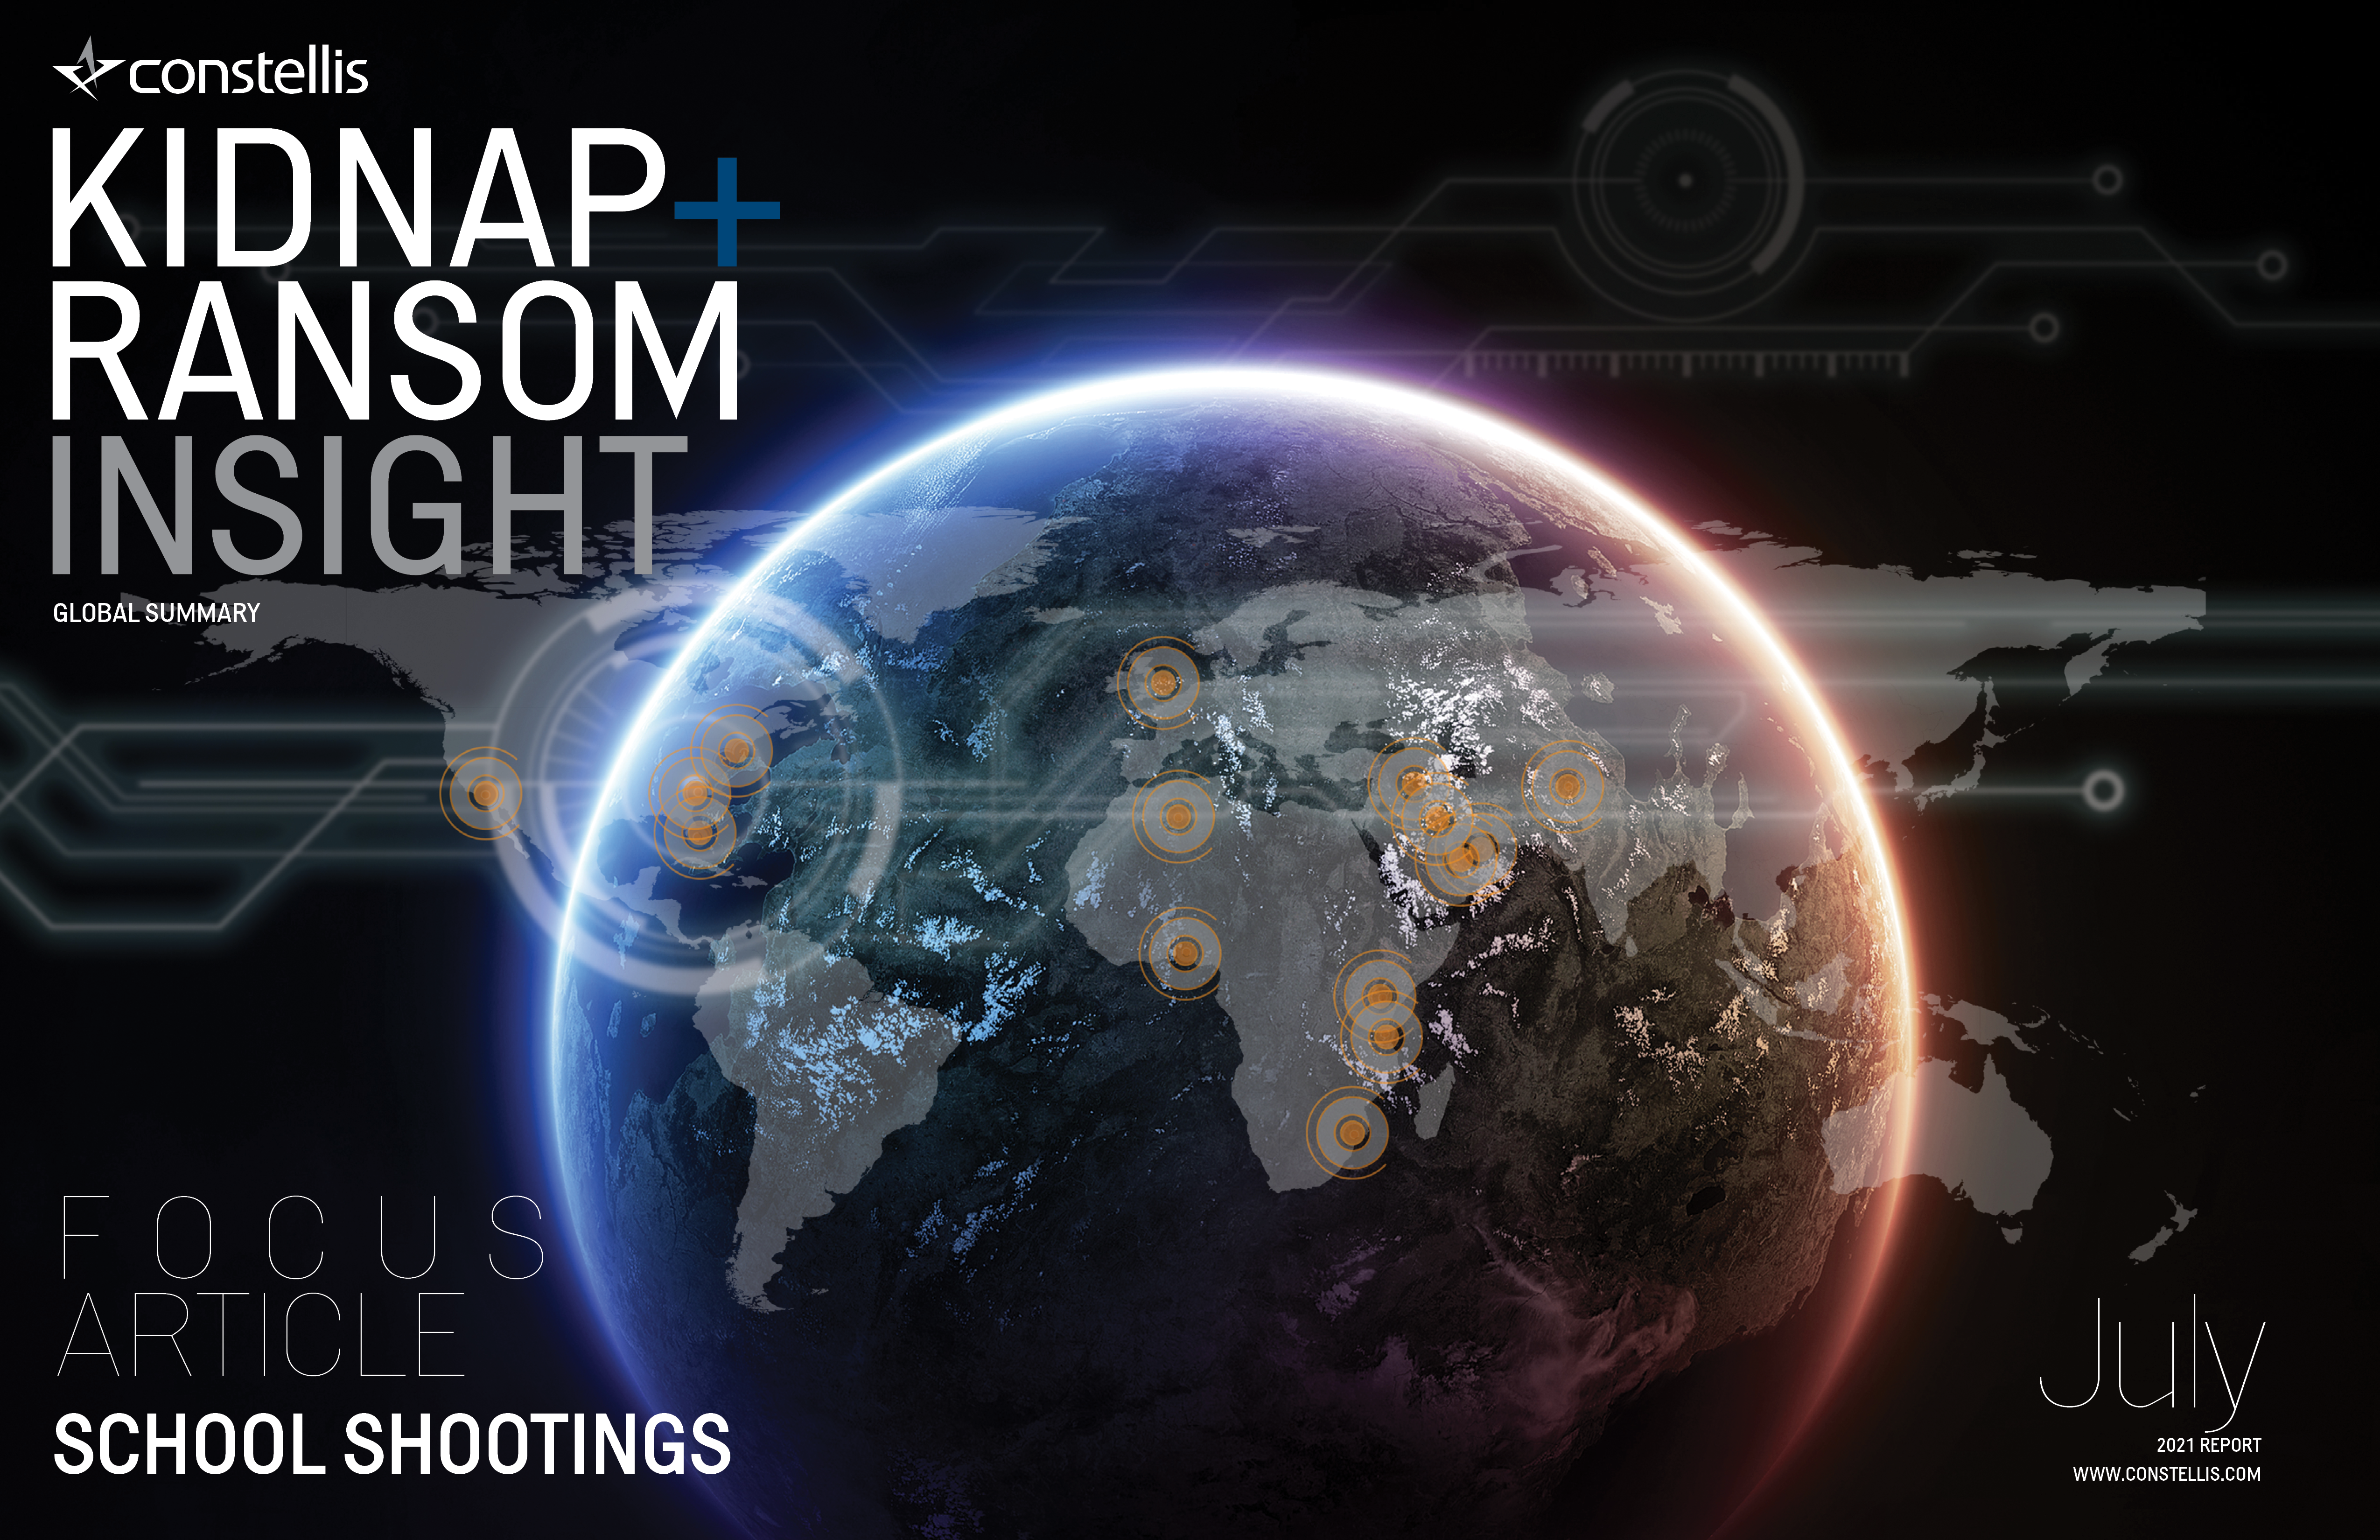 Global Kidnap for Ransom Insight – July 2021